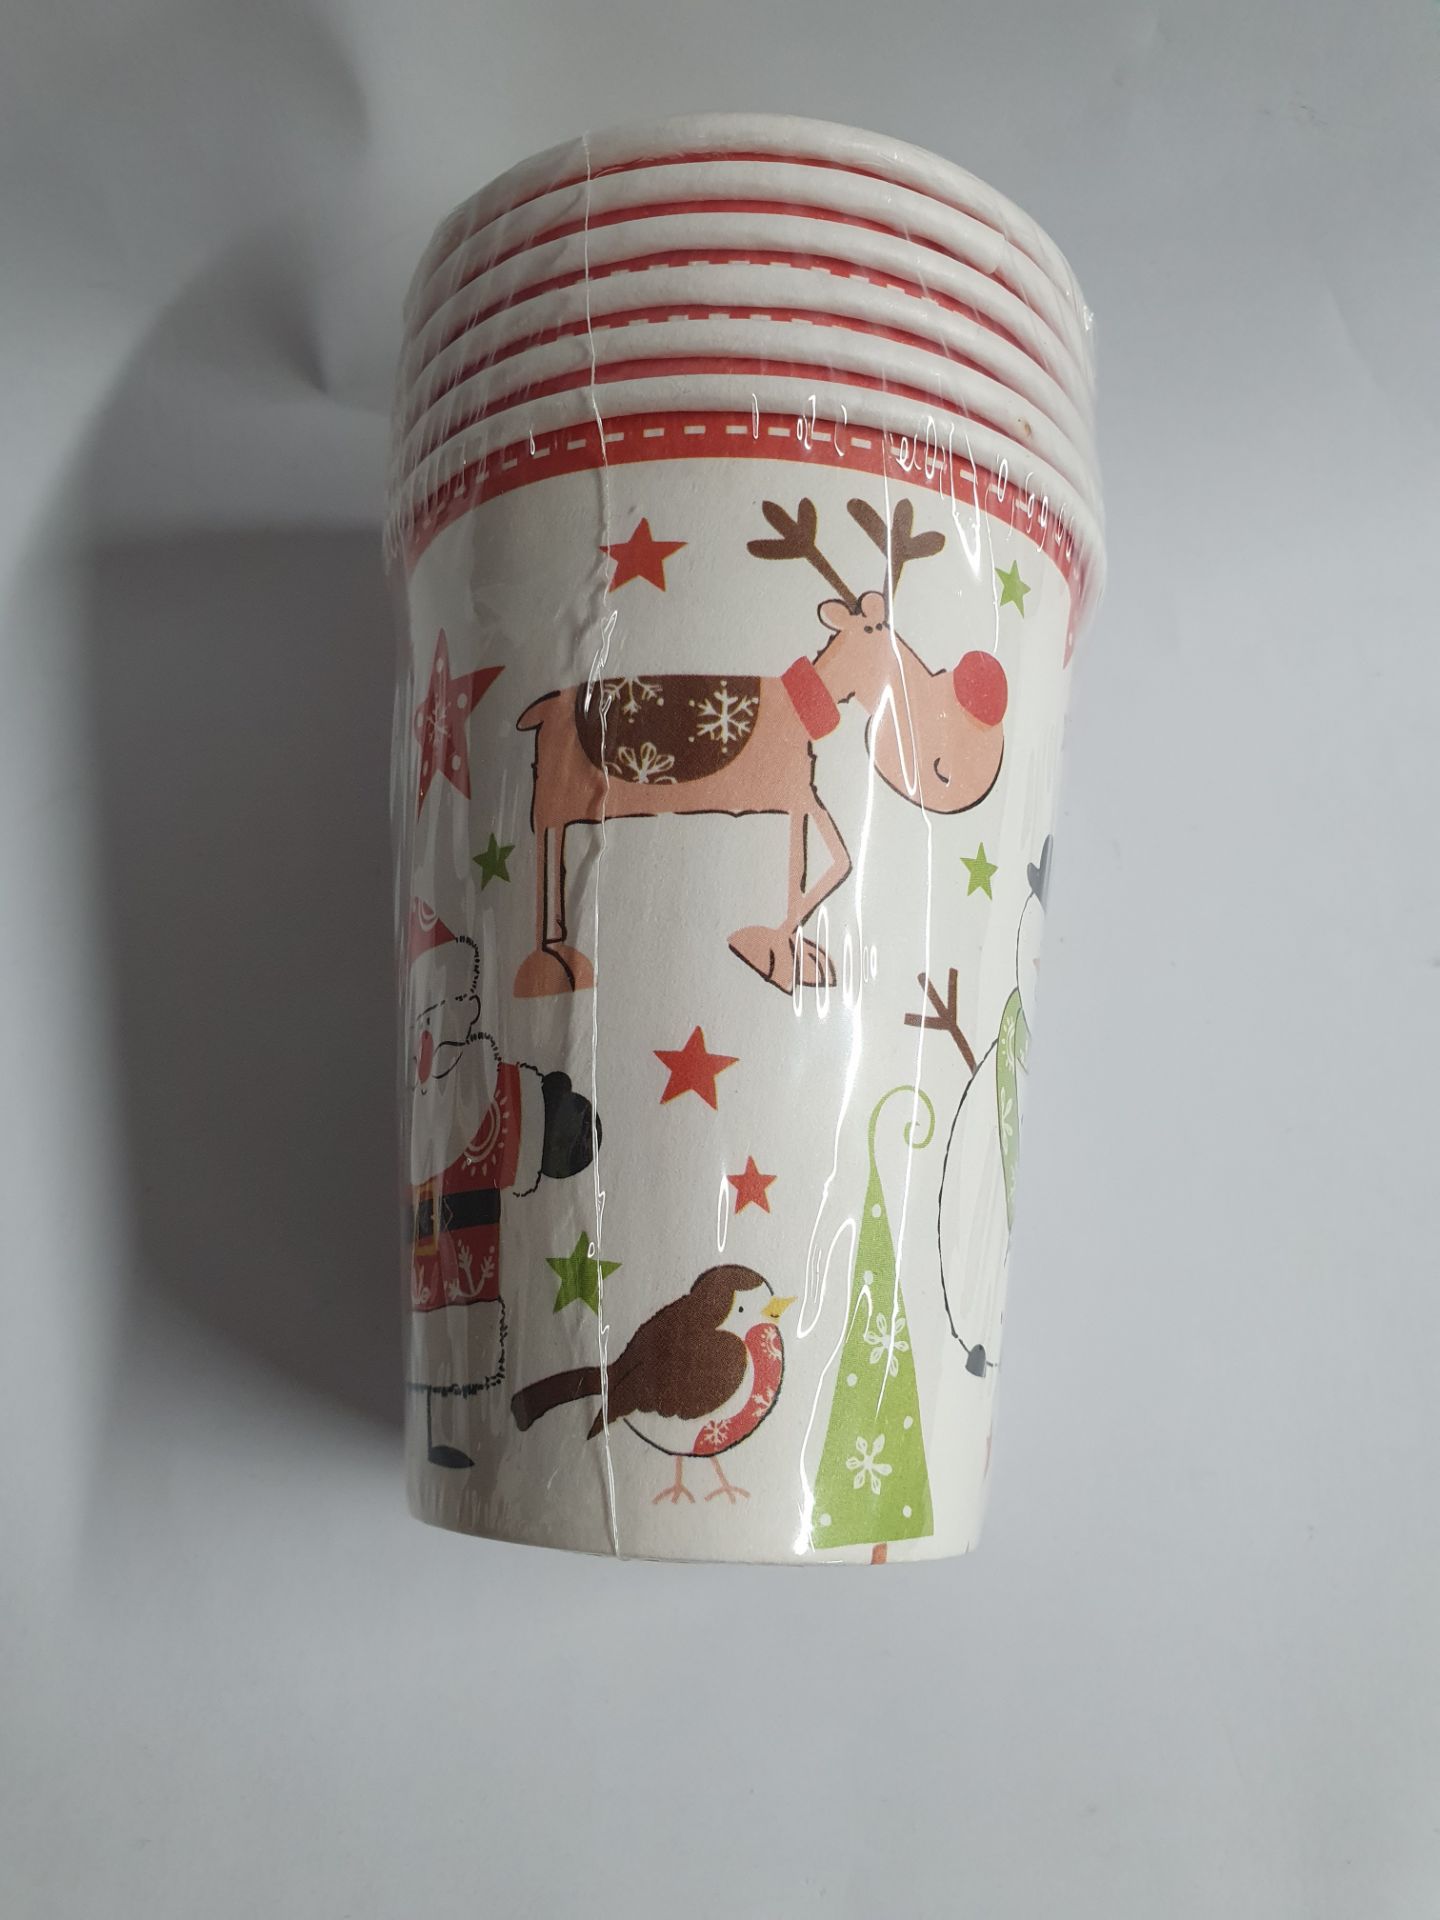 90 x Various Christmas Themed Disposable Tableware - Image 4 of 5